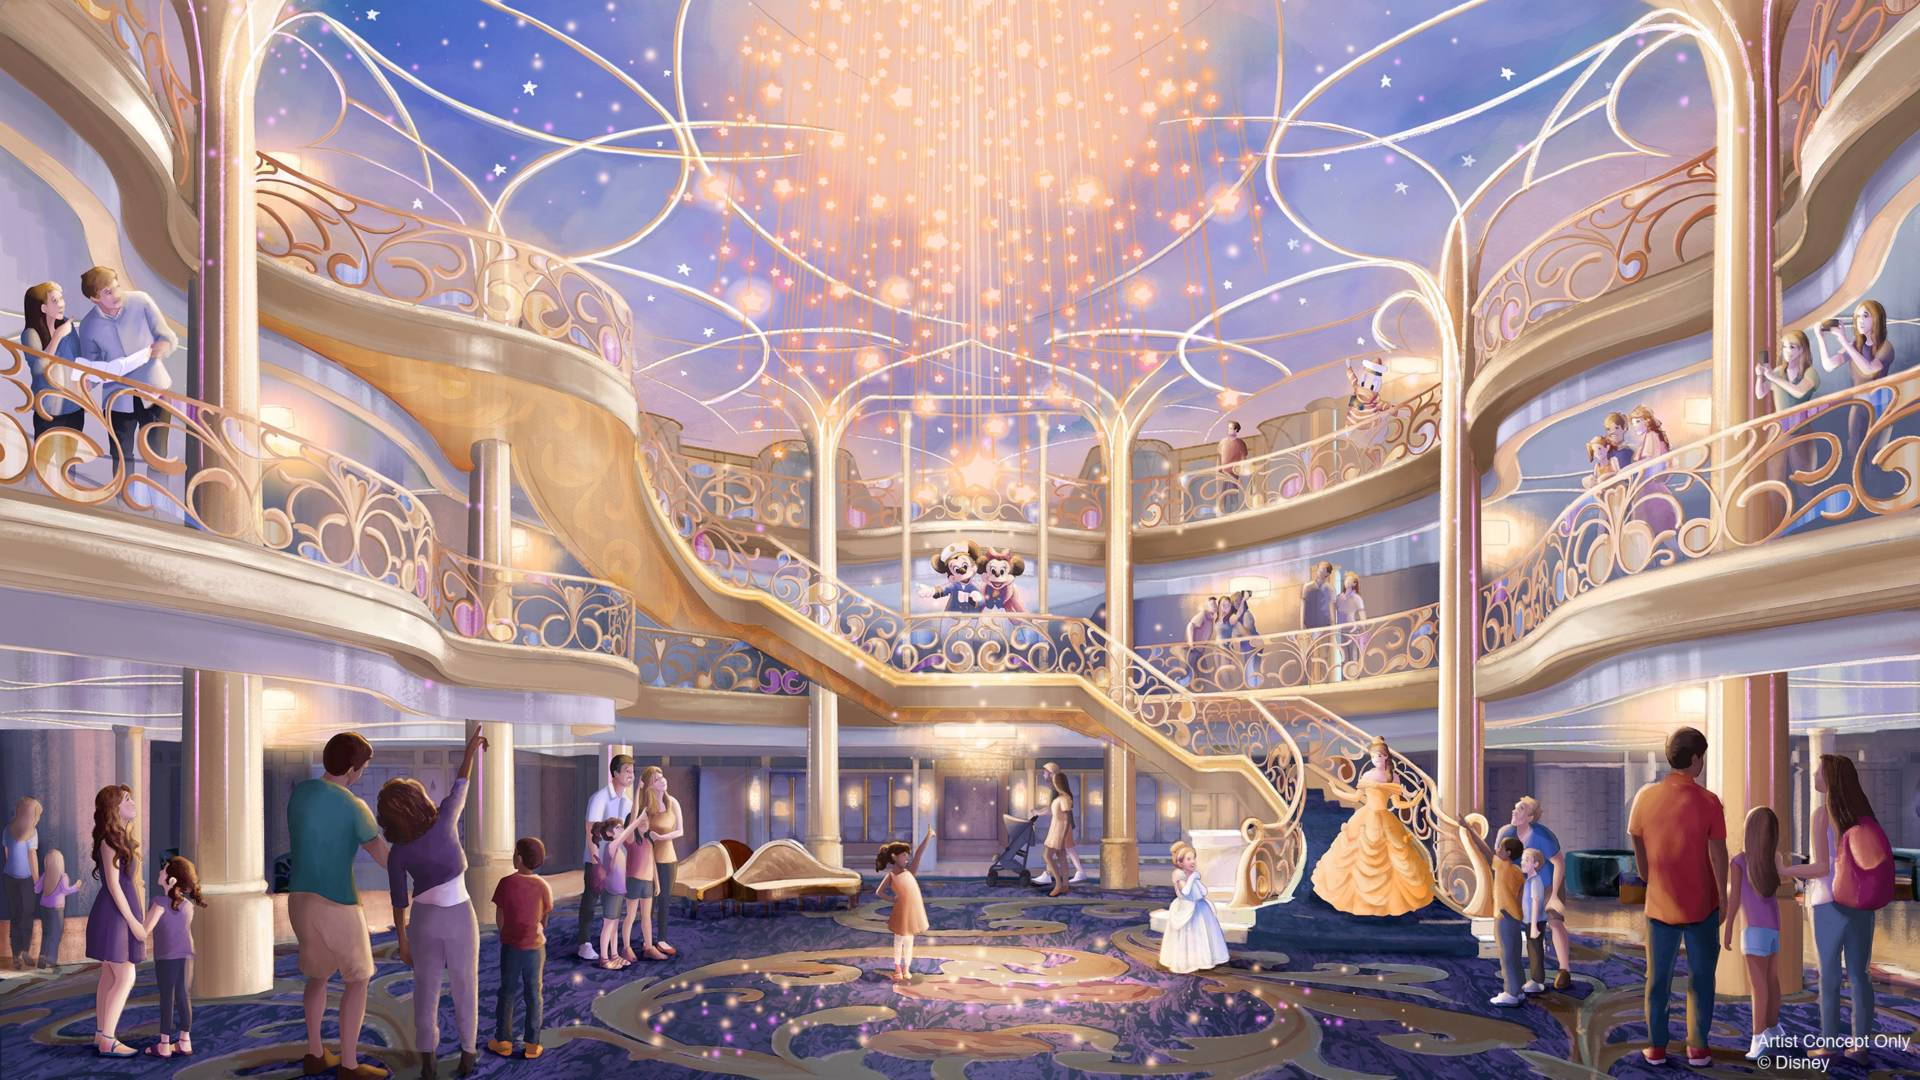 D23 Expo, D23 Expo: Disney Cruise Line to set sail for new Bahamian port of call